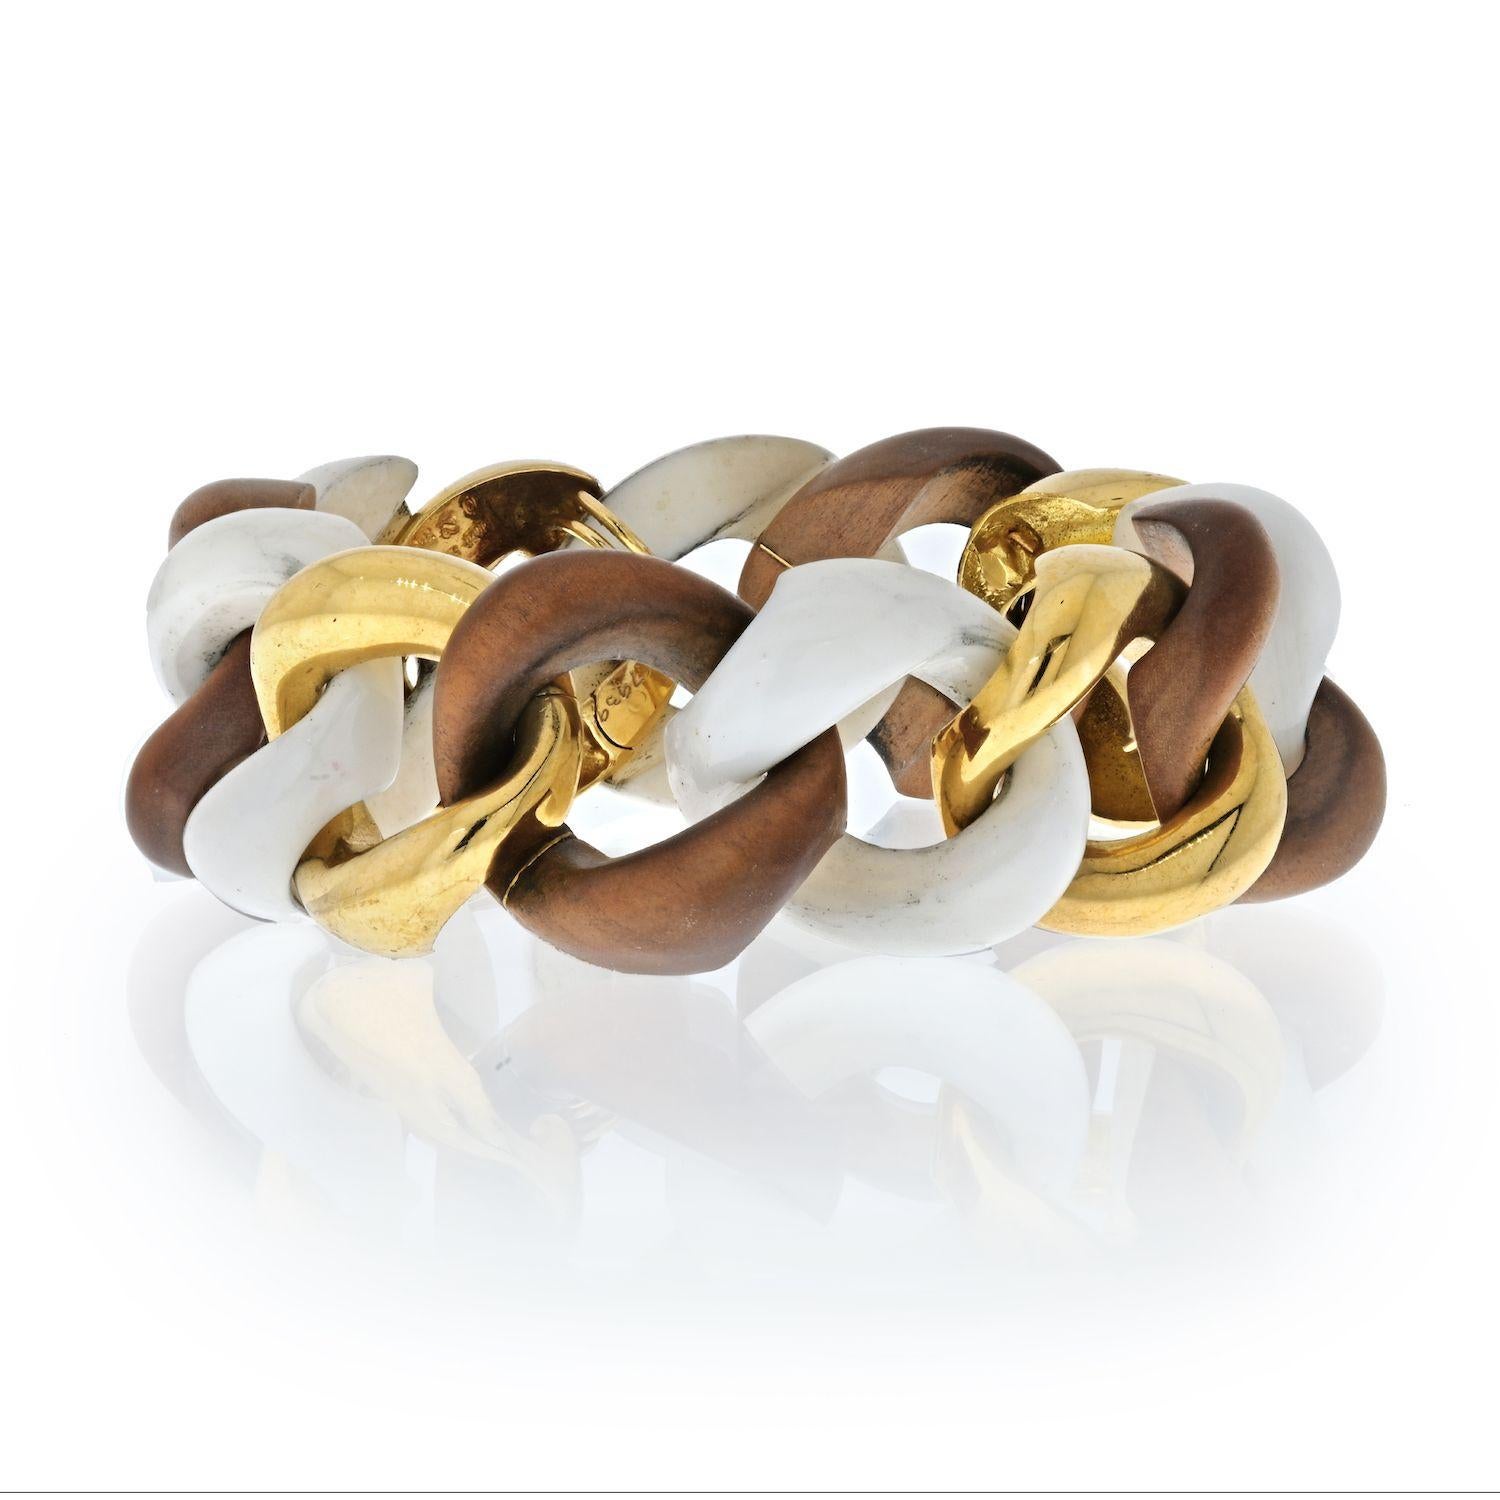 This is a Seaman Schepps 18K Yellow Gold Walnut Wood, White Ceramic And Gold Link Bracelet. Crafted in a signature curb link style. Length: 7.75 inches. Crafted to be worn loose. 
Width: 25mm.
Seaman Schepps client list includes Coco Chanel, Elsa